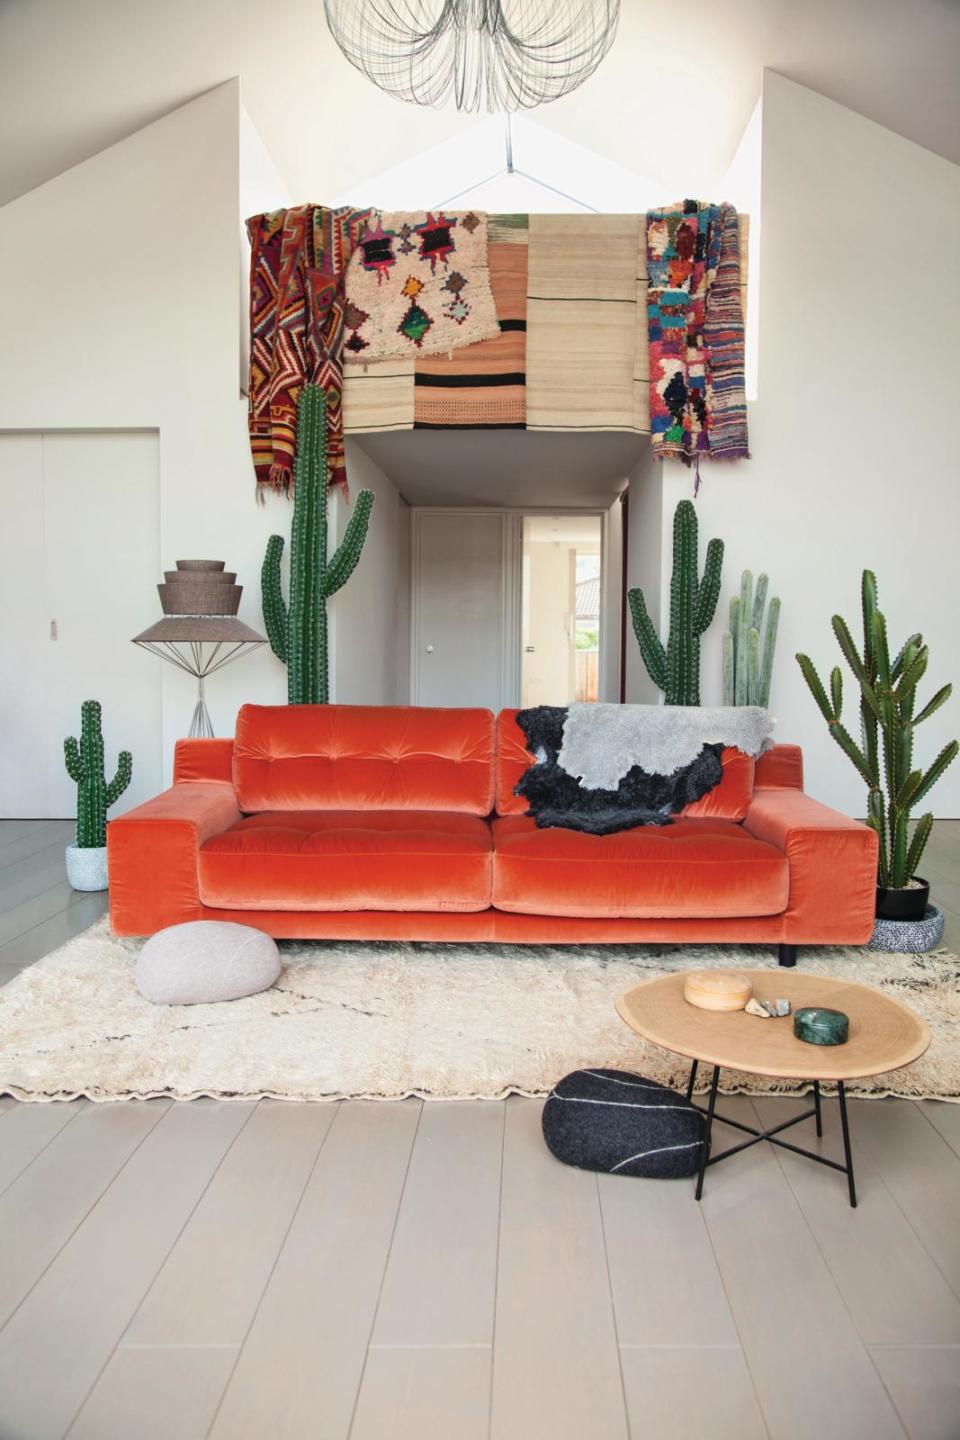 A living room with an orange sofa, with cacti surrounding it